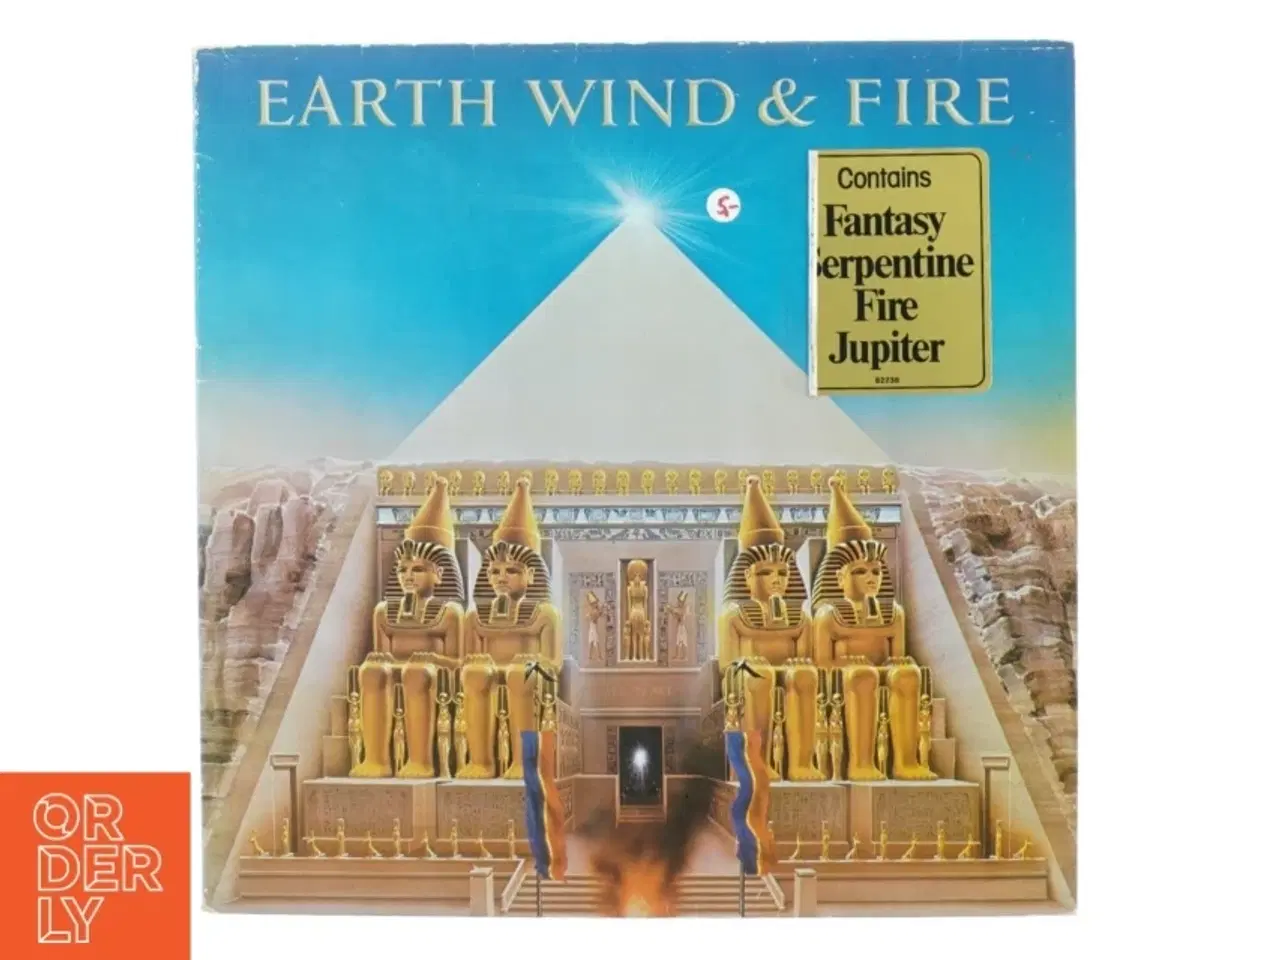 Billede 1 - Earth wind and fire (LP)